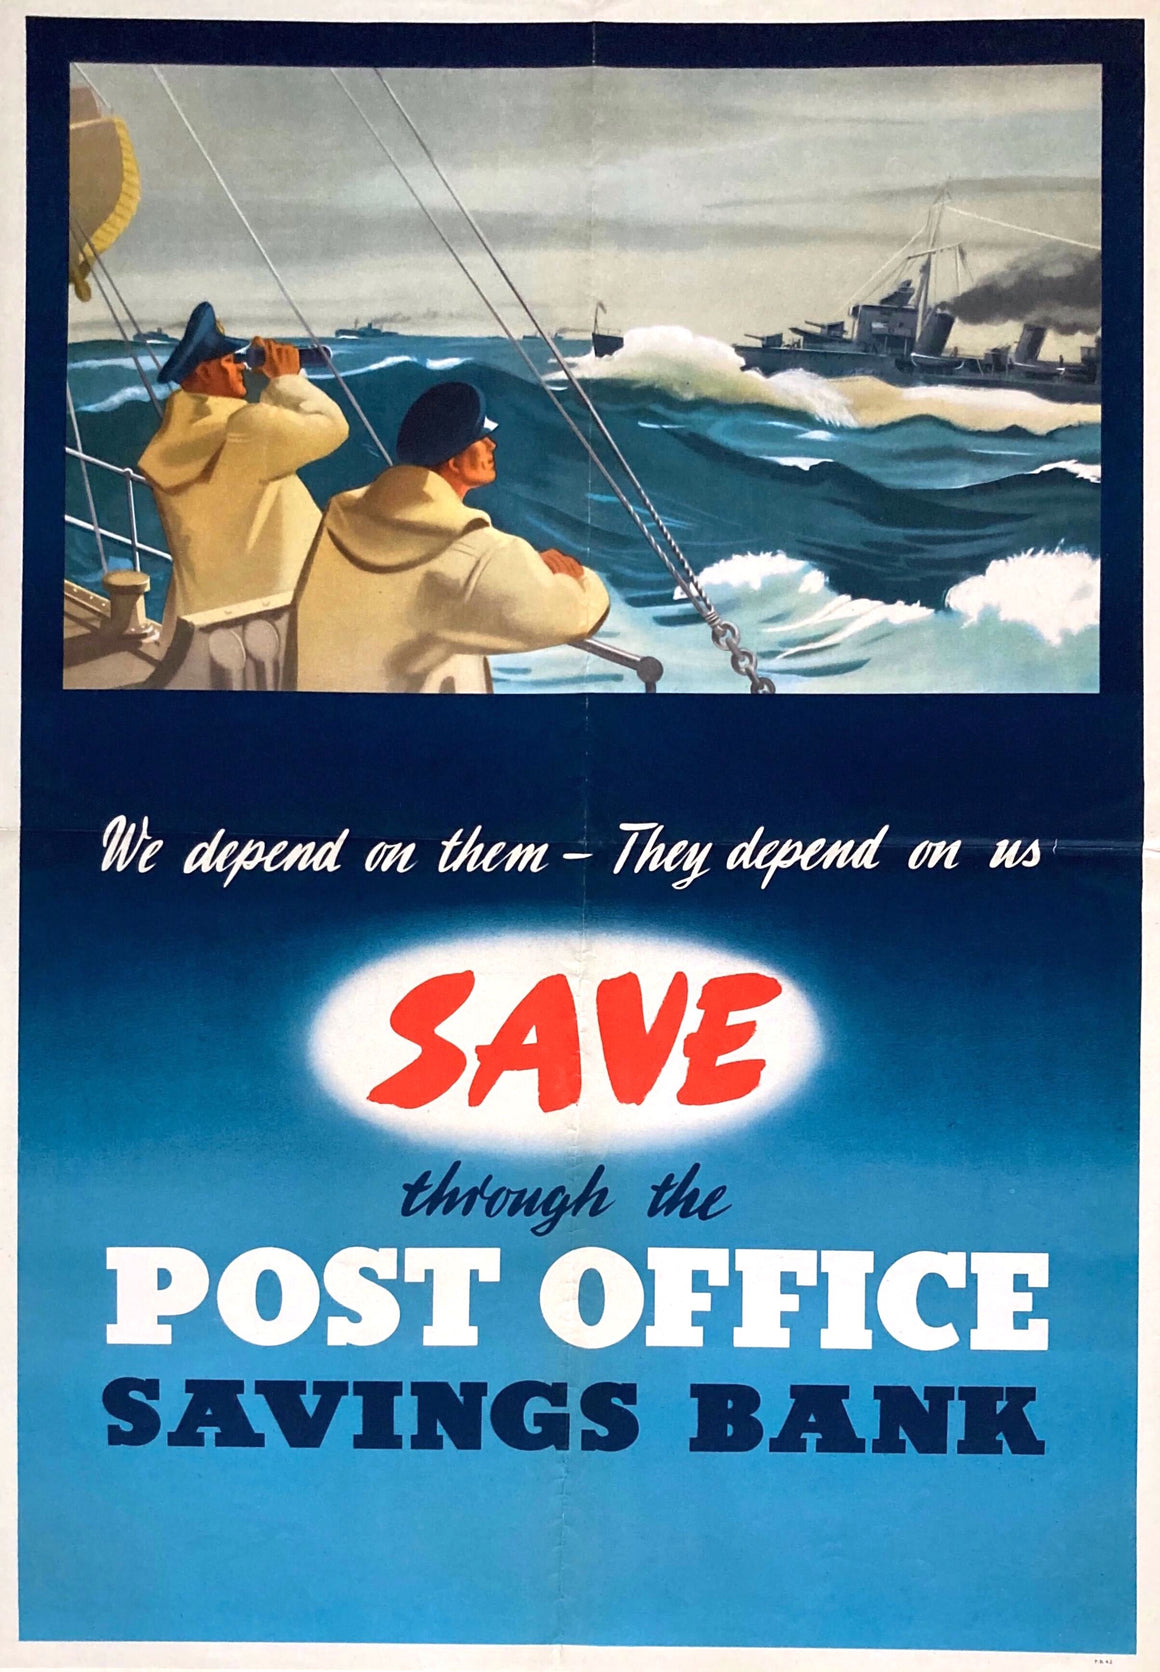 "We depend on them- They depend on us. Save through the Post Office Savings Bank" Vintage WWII Poster, 1942